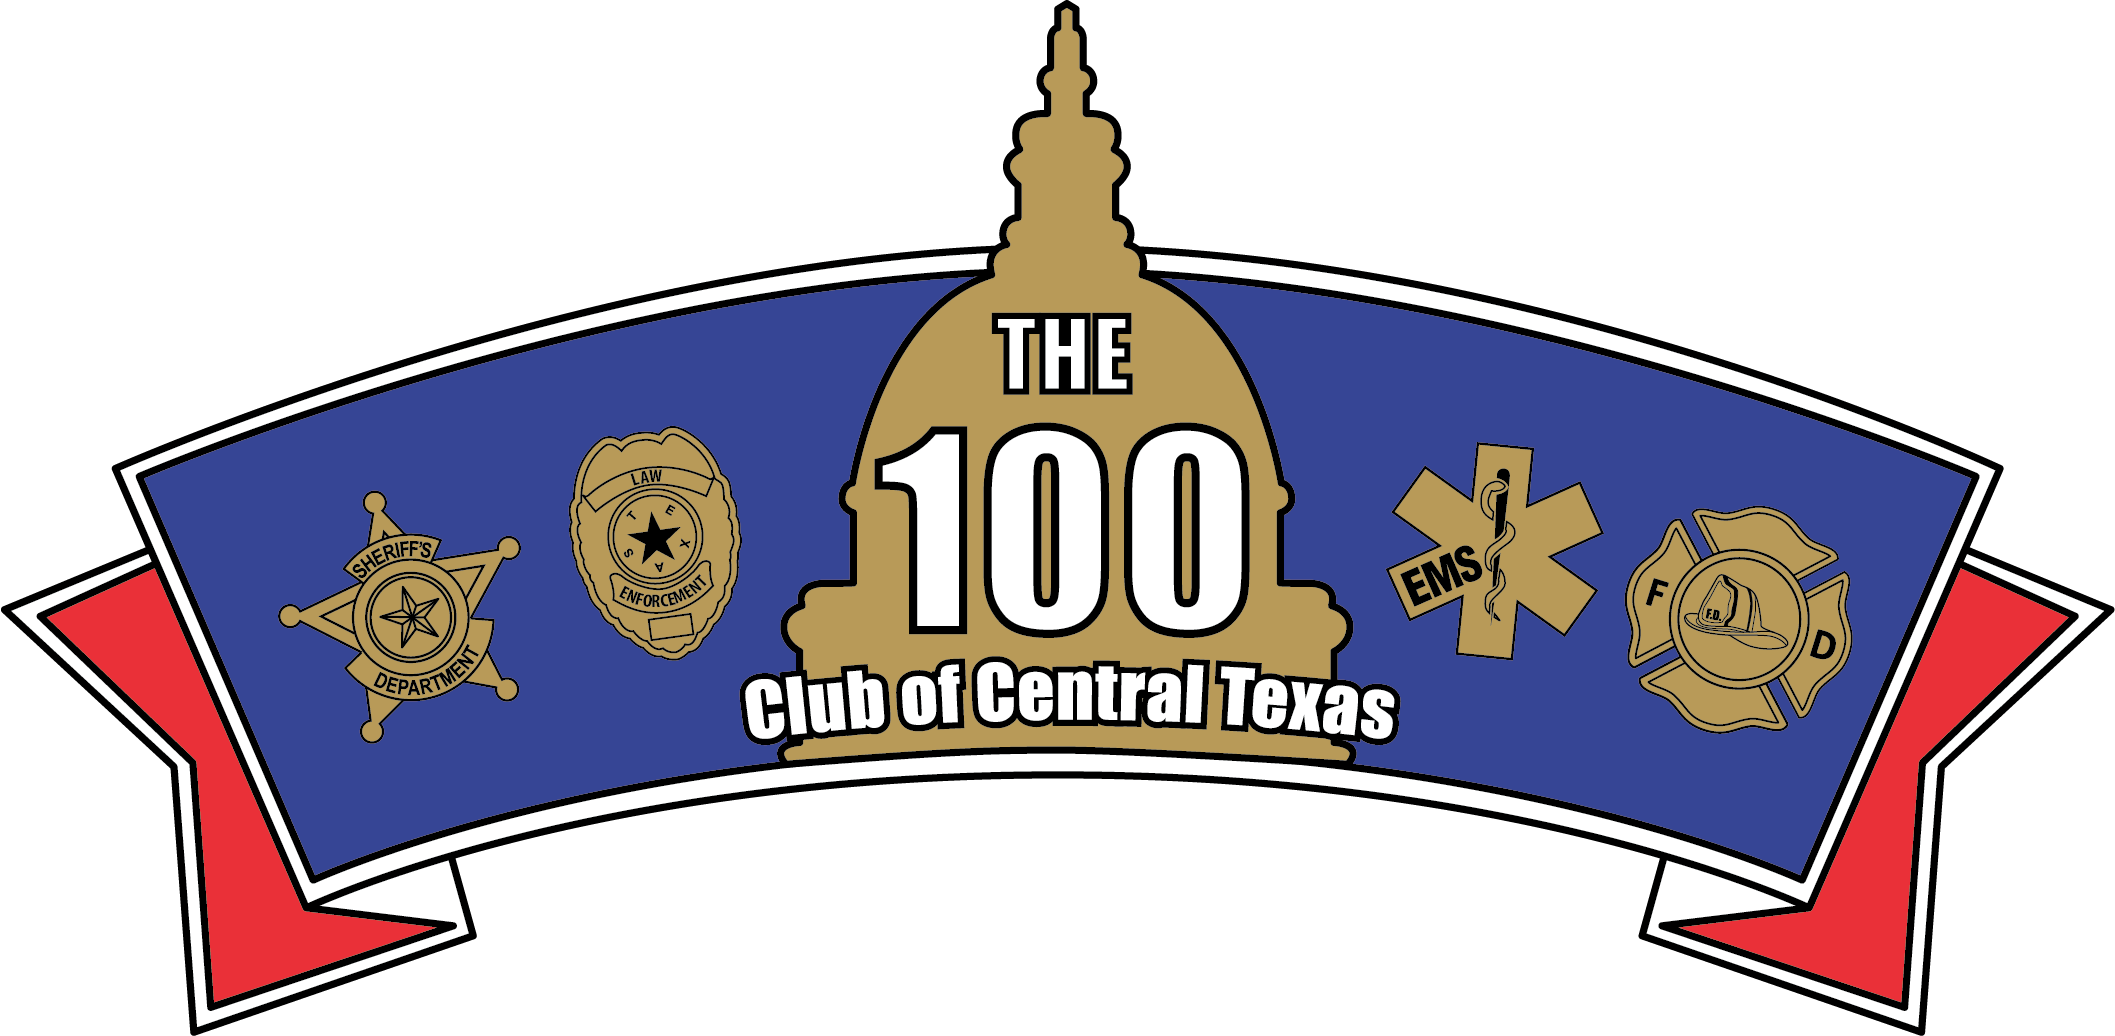 Home - The 100 Club of Central Texas